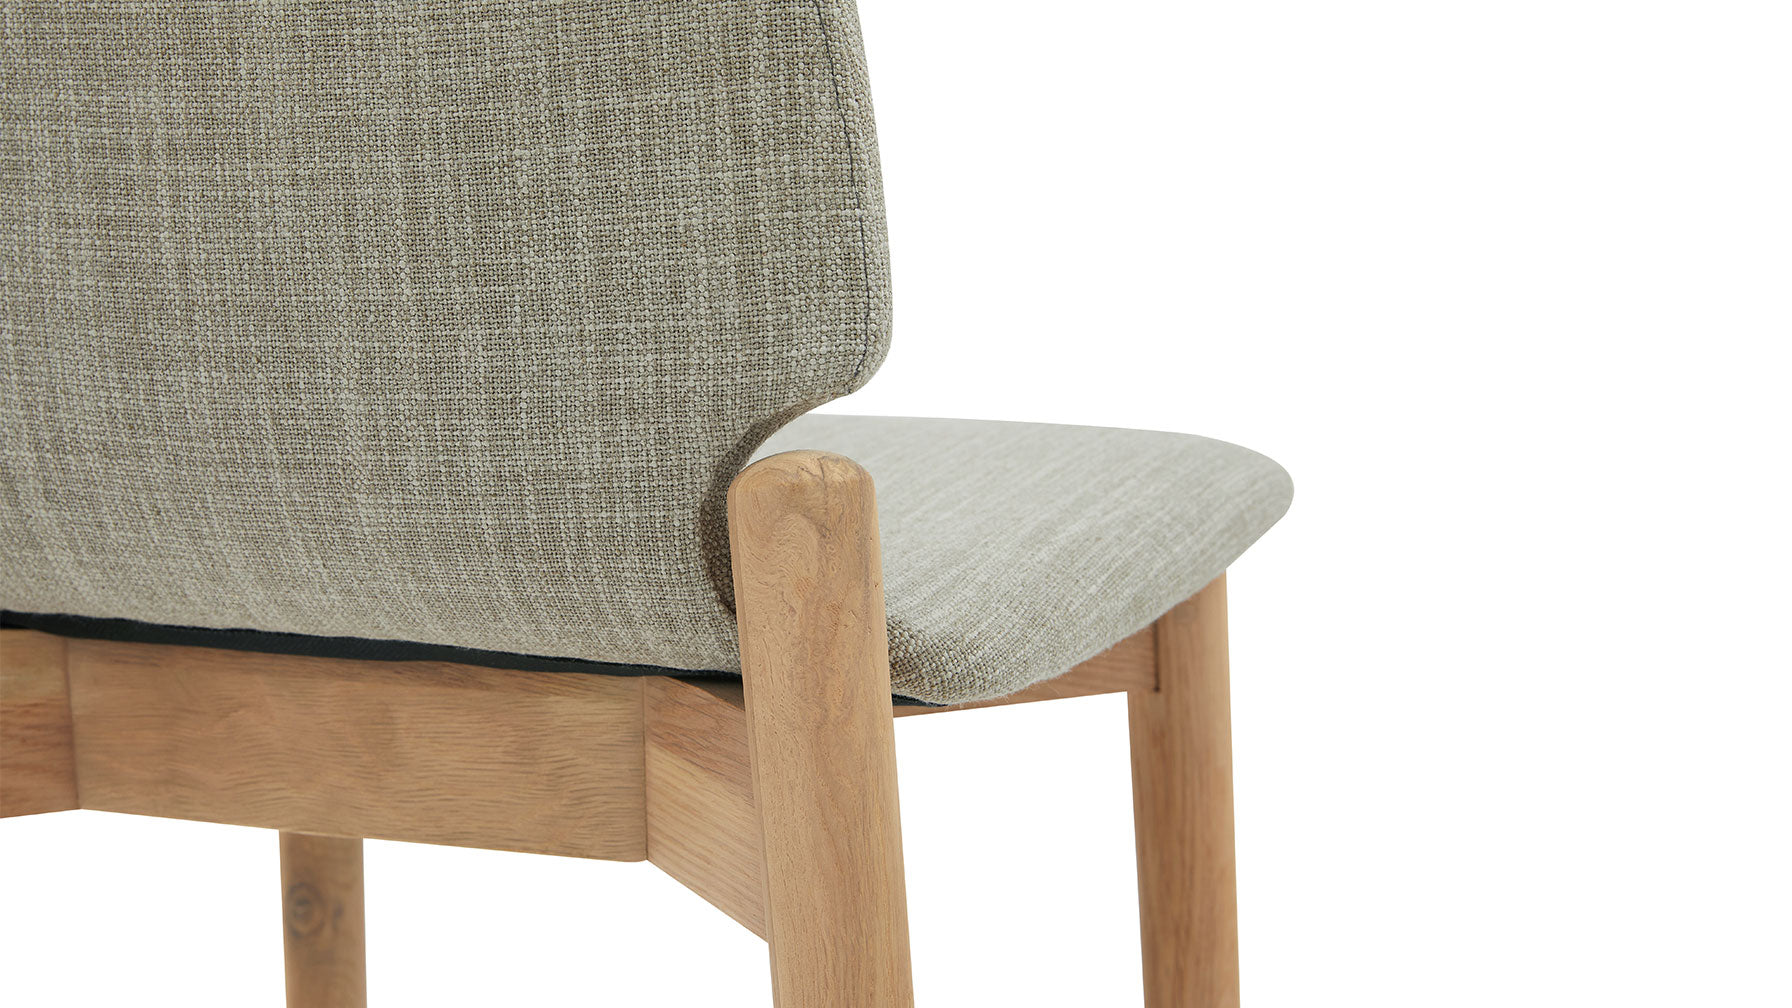 Dine In Stool, Counter, Oak/Taupe Fabric - Image 7